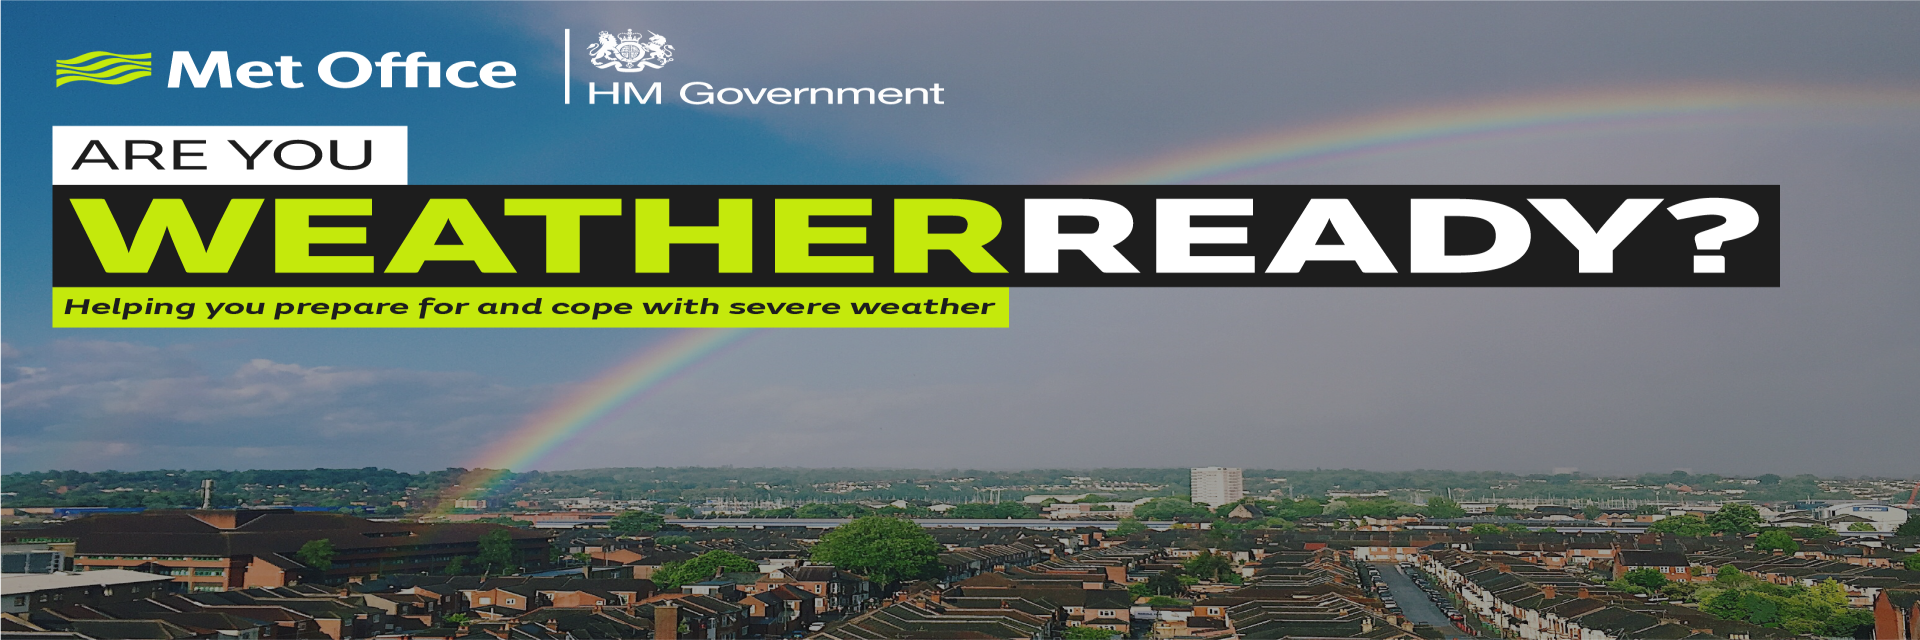 Weather Ready Campaign - Summer